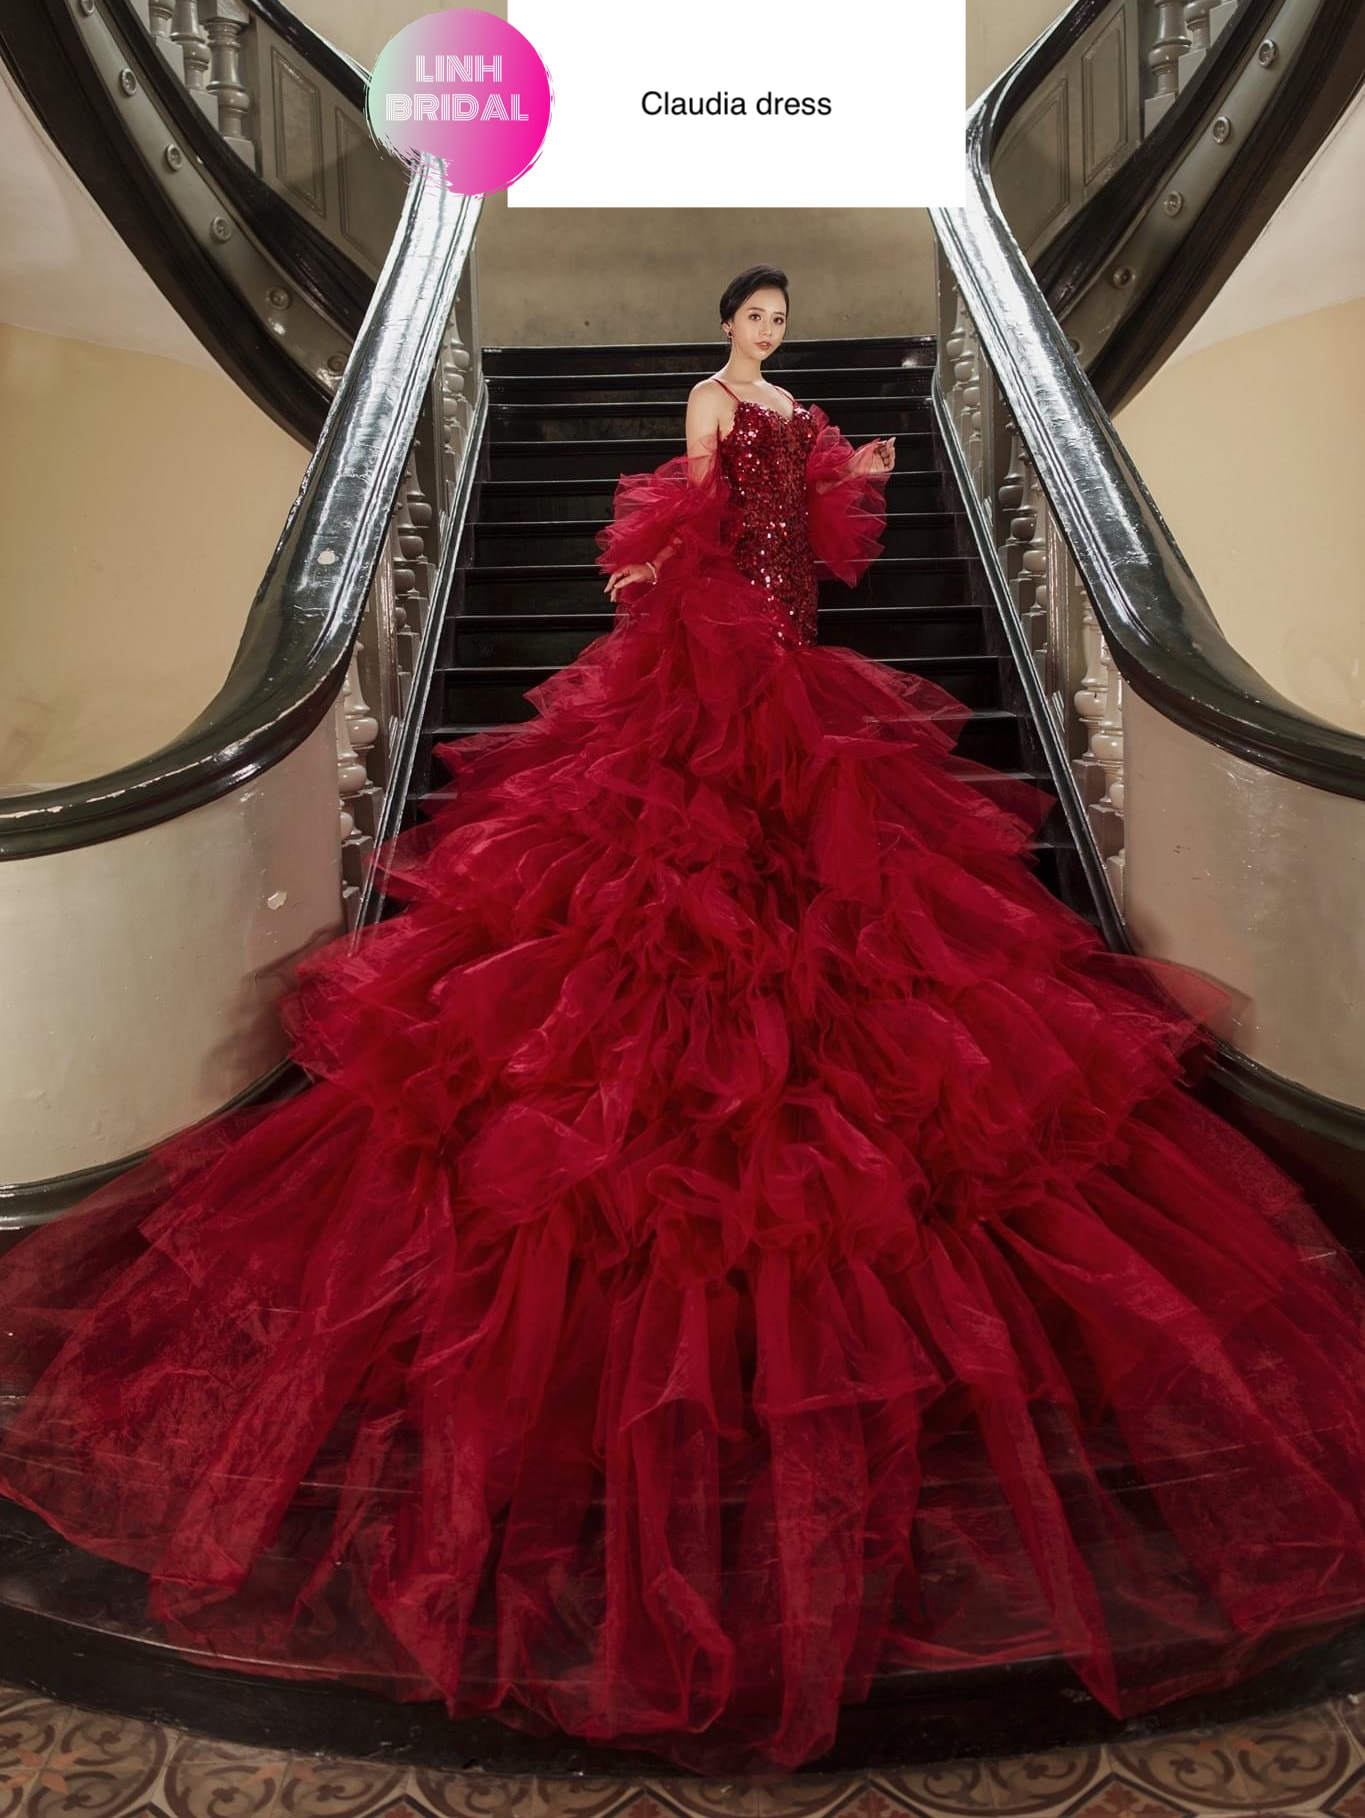 Where can I find 'dramatic' ball gowns like this? : r/findfashion